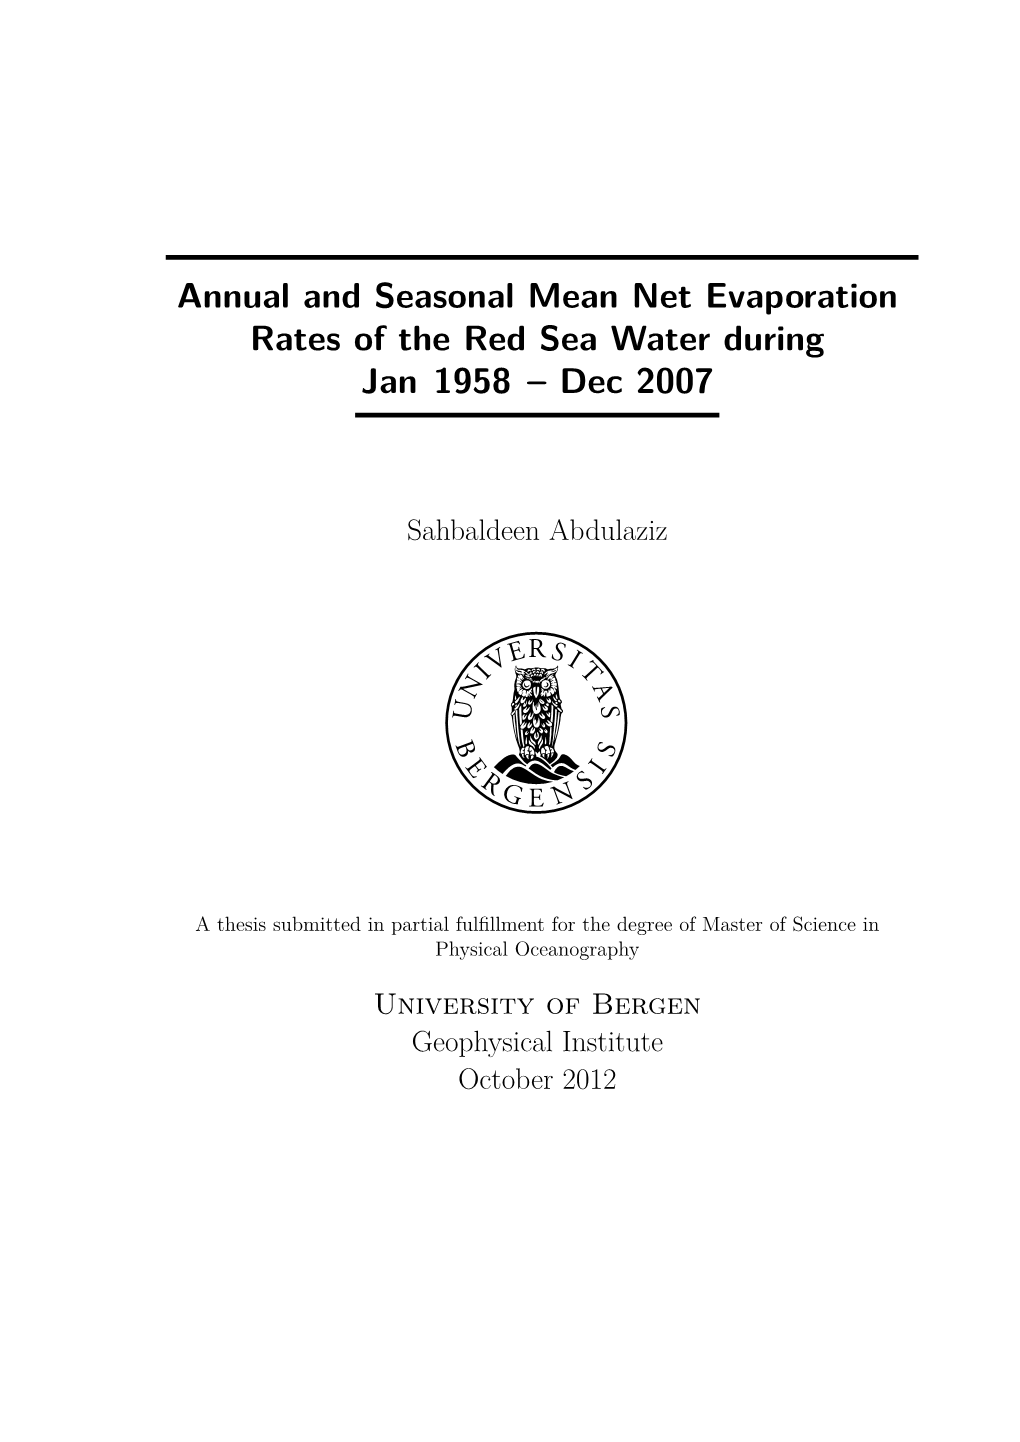 Annual and Seasonal Mean Net Evaporation Rates of the Red Sea Water During Jan 1958 – Dec 2007